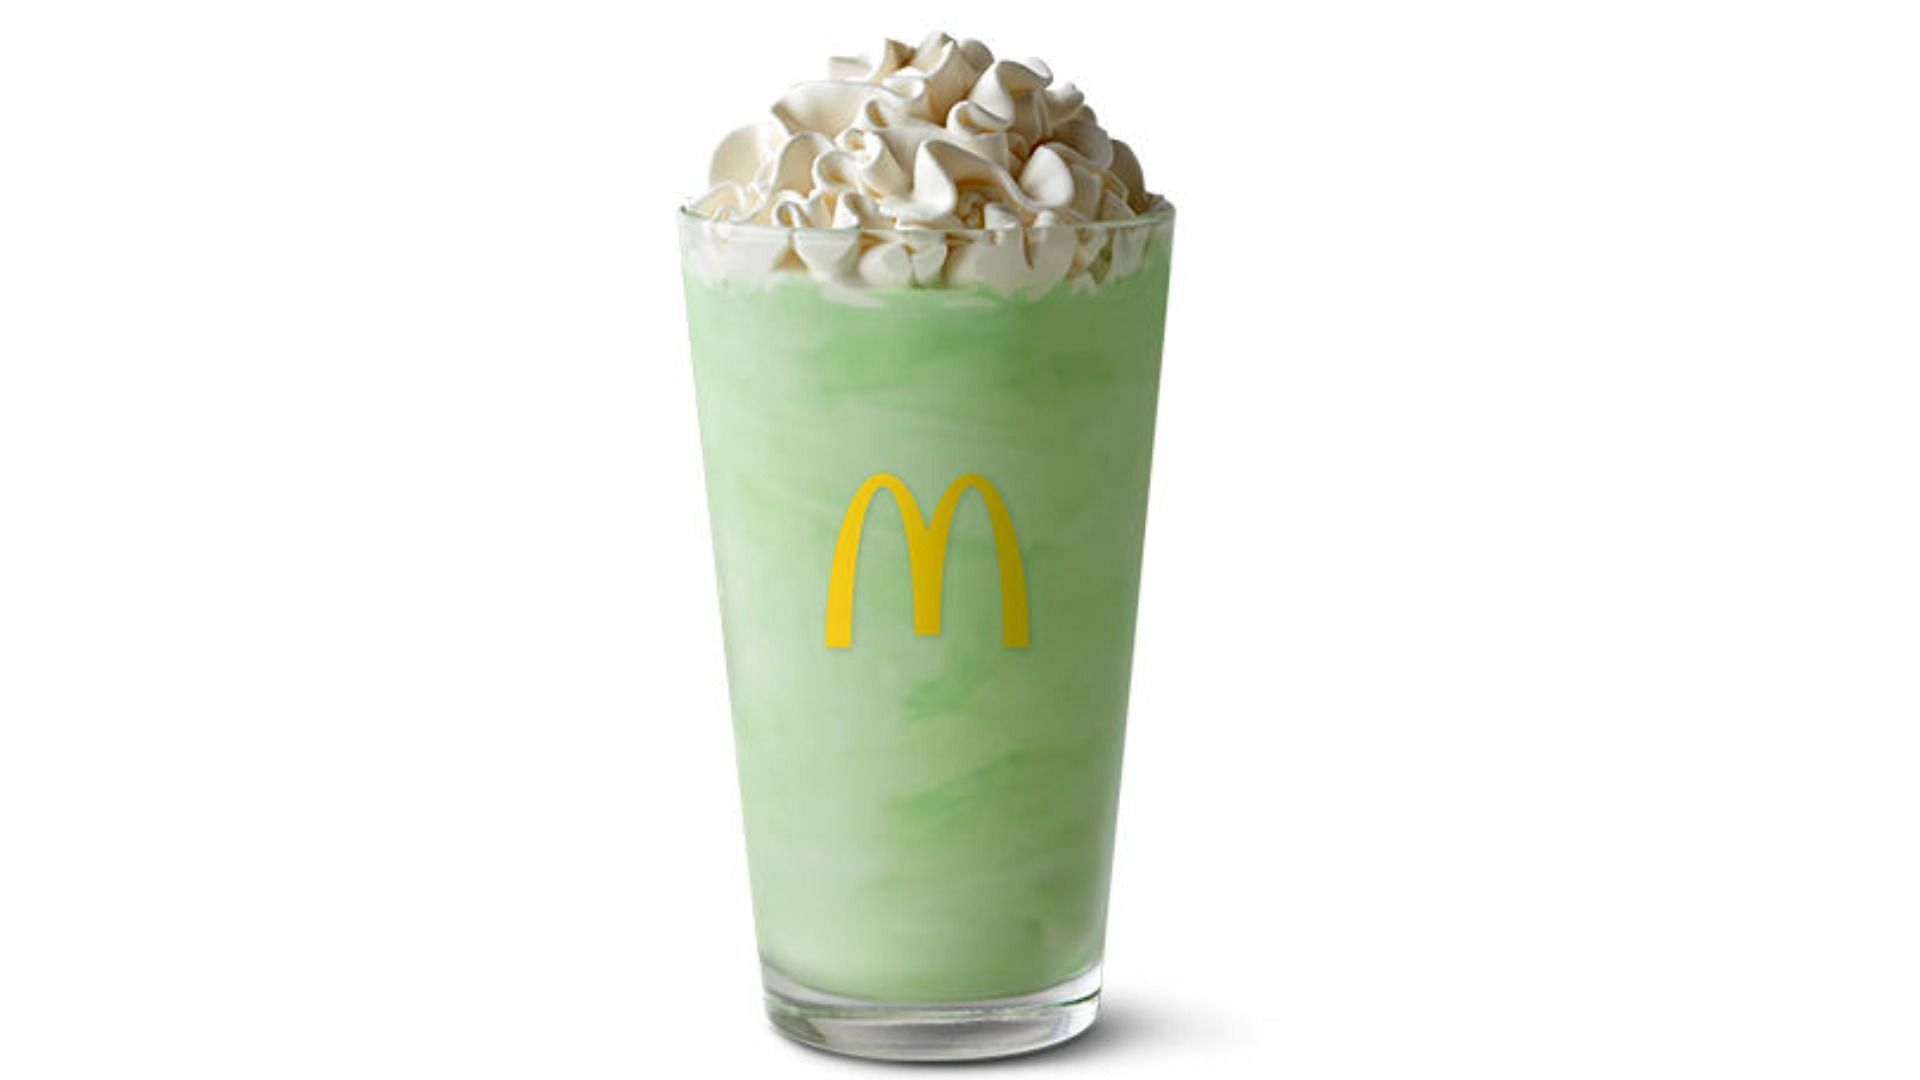 Shamrock Shake was invented by Hal Rosen in 1967 as a seasonal treat for St. Patrick&#039;s Day (Image via McDonald&#039;s)